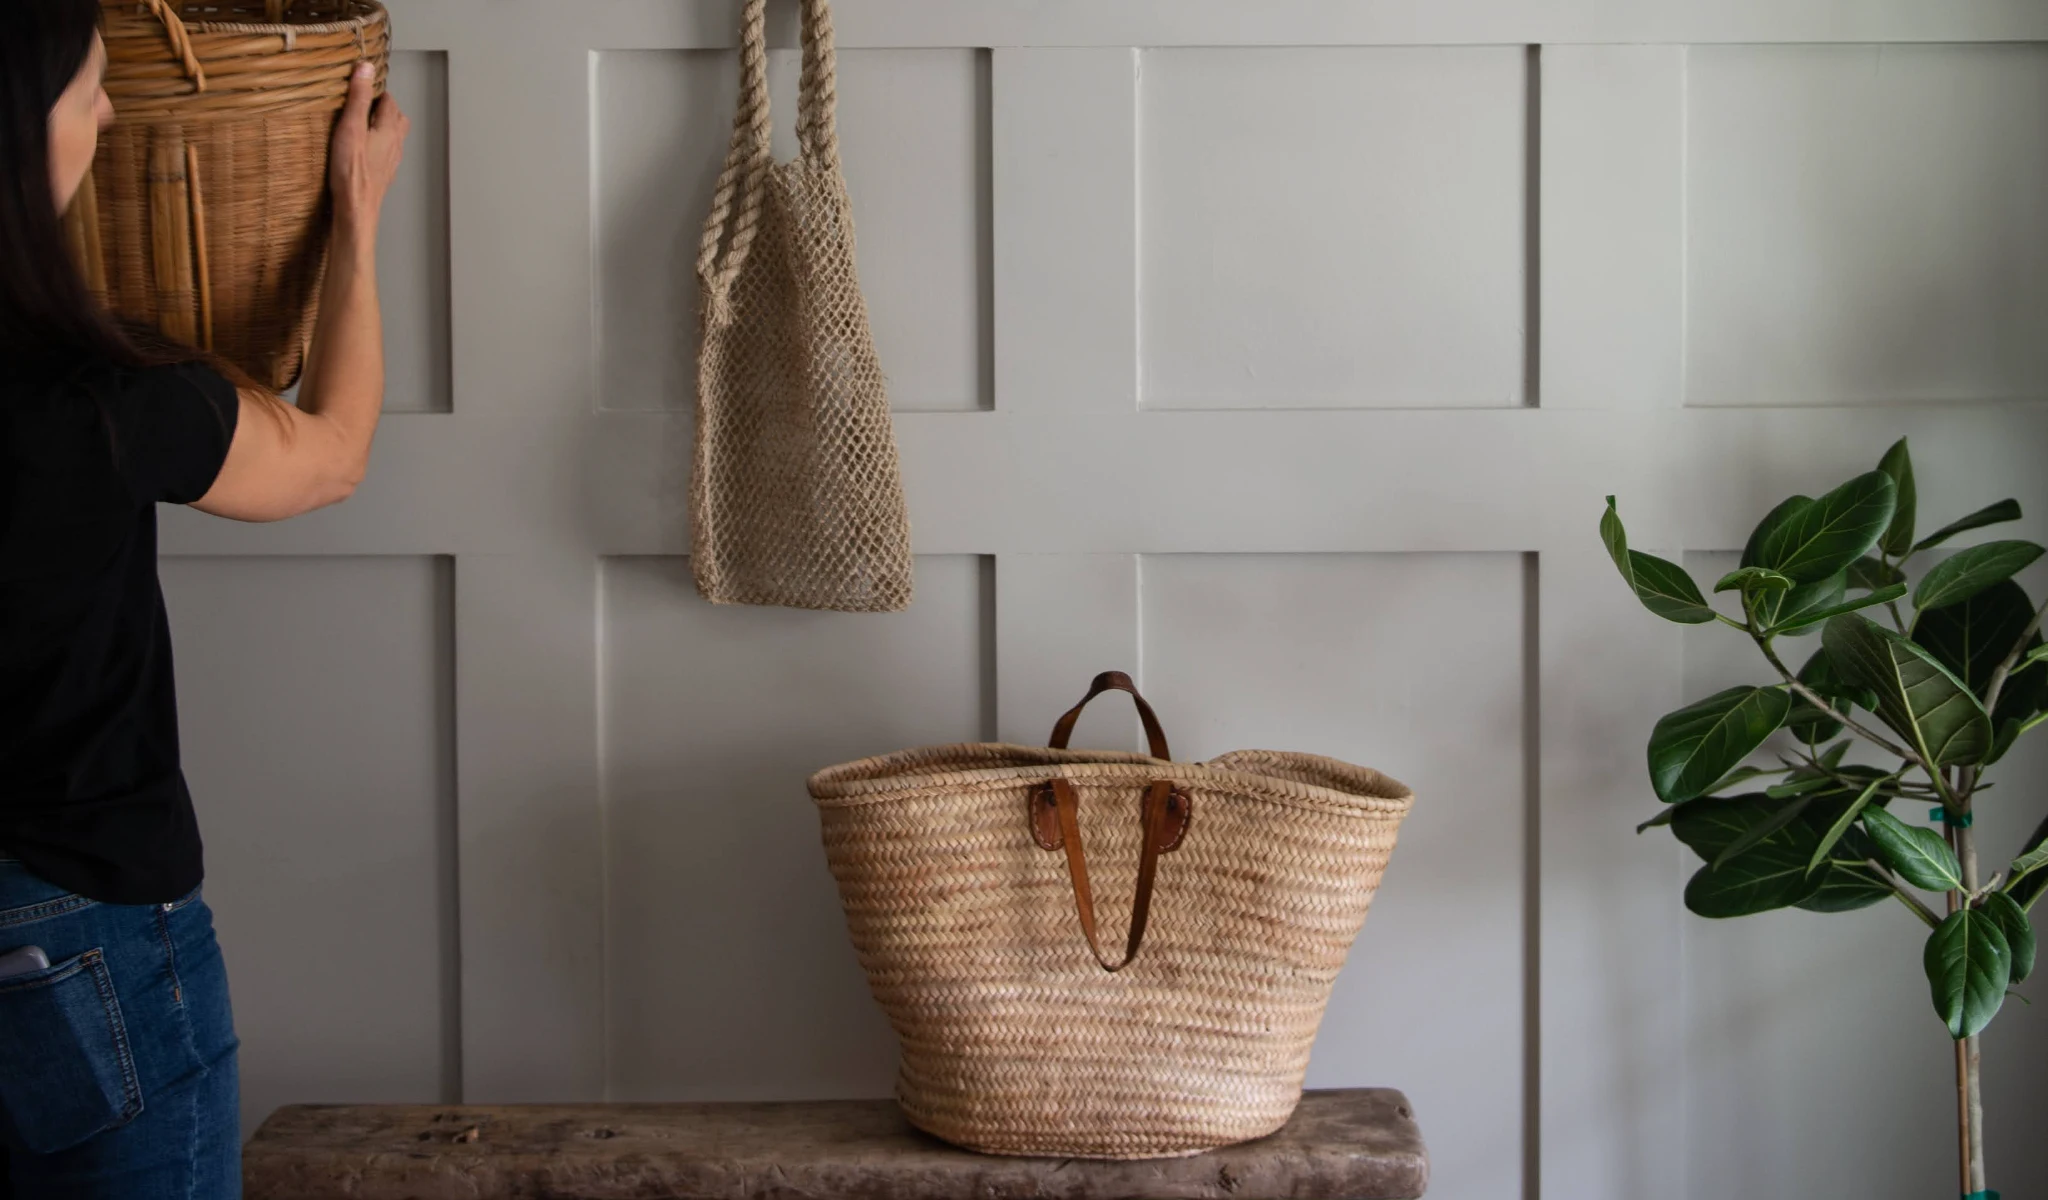 Two wicker baskets hanging on a wall.